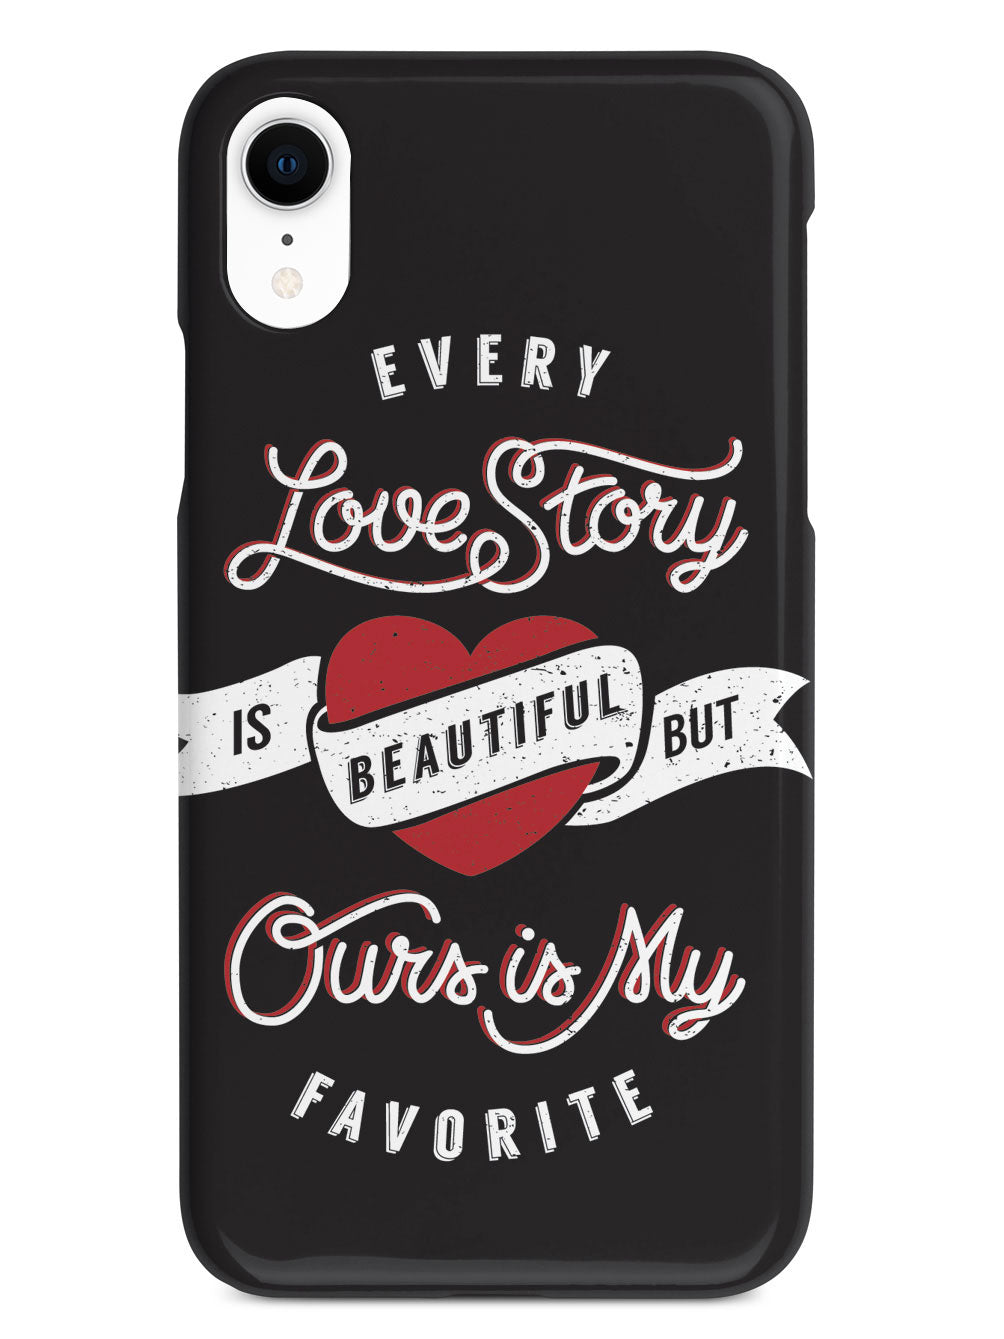 Our Love Story Case